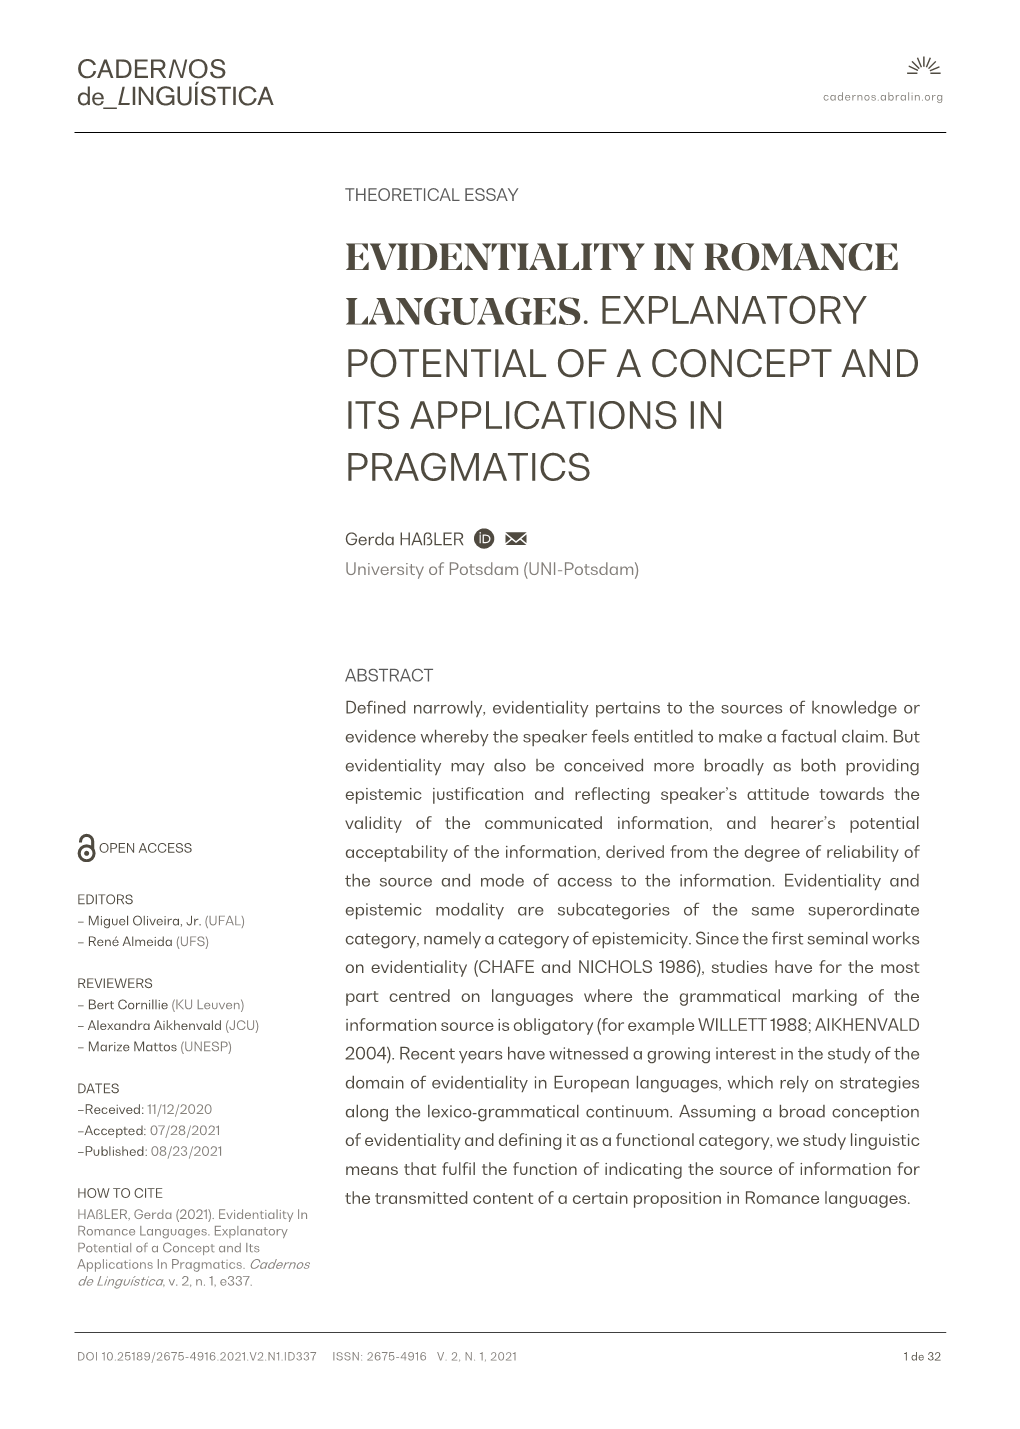 Evidentiality in Romance Languages